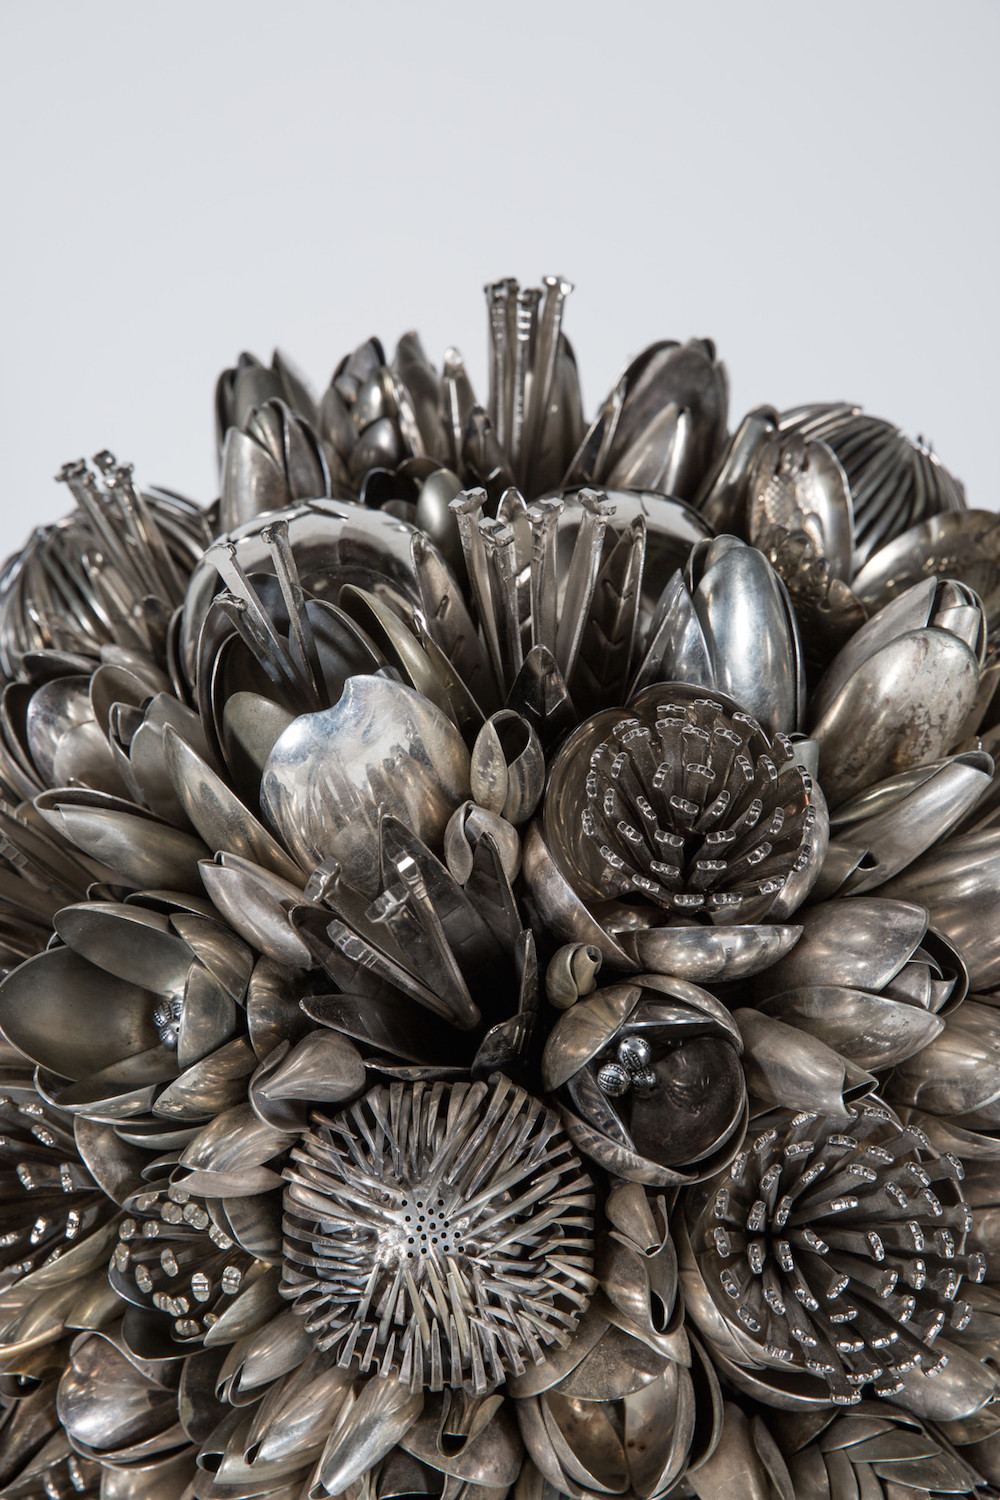 Amazingly Intricate Metal Bouquets Made Of Spare Utensils By Ann Carrington 9